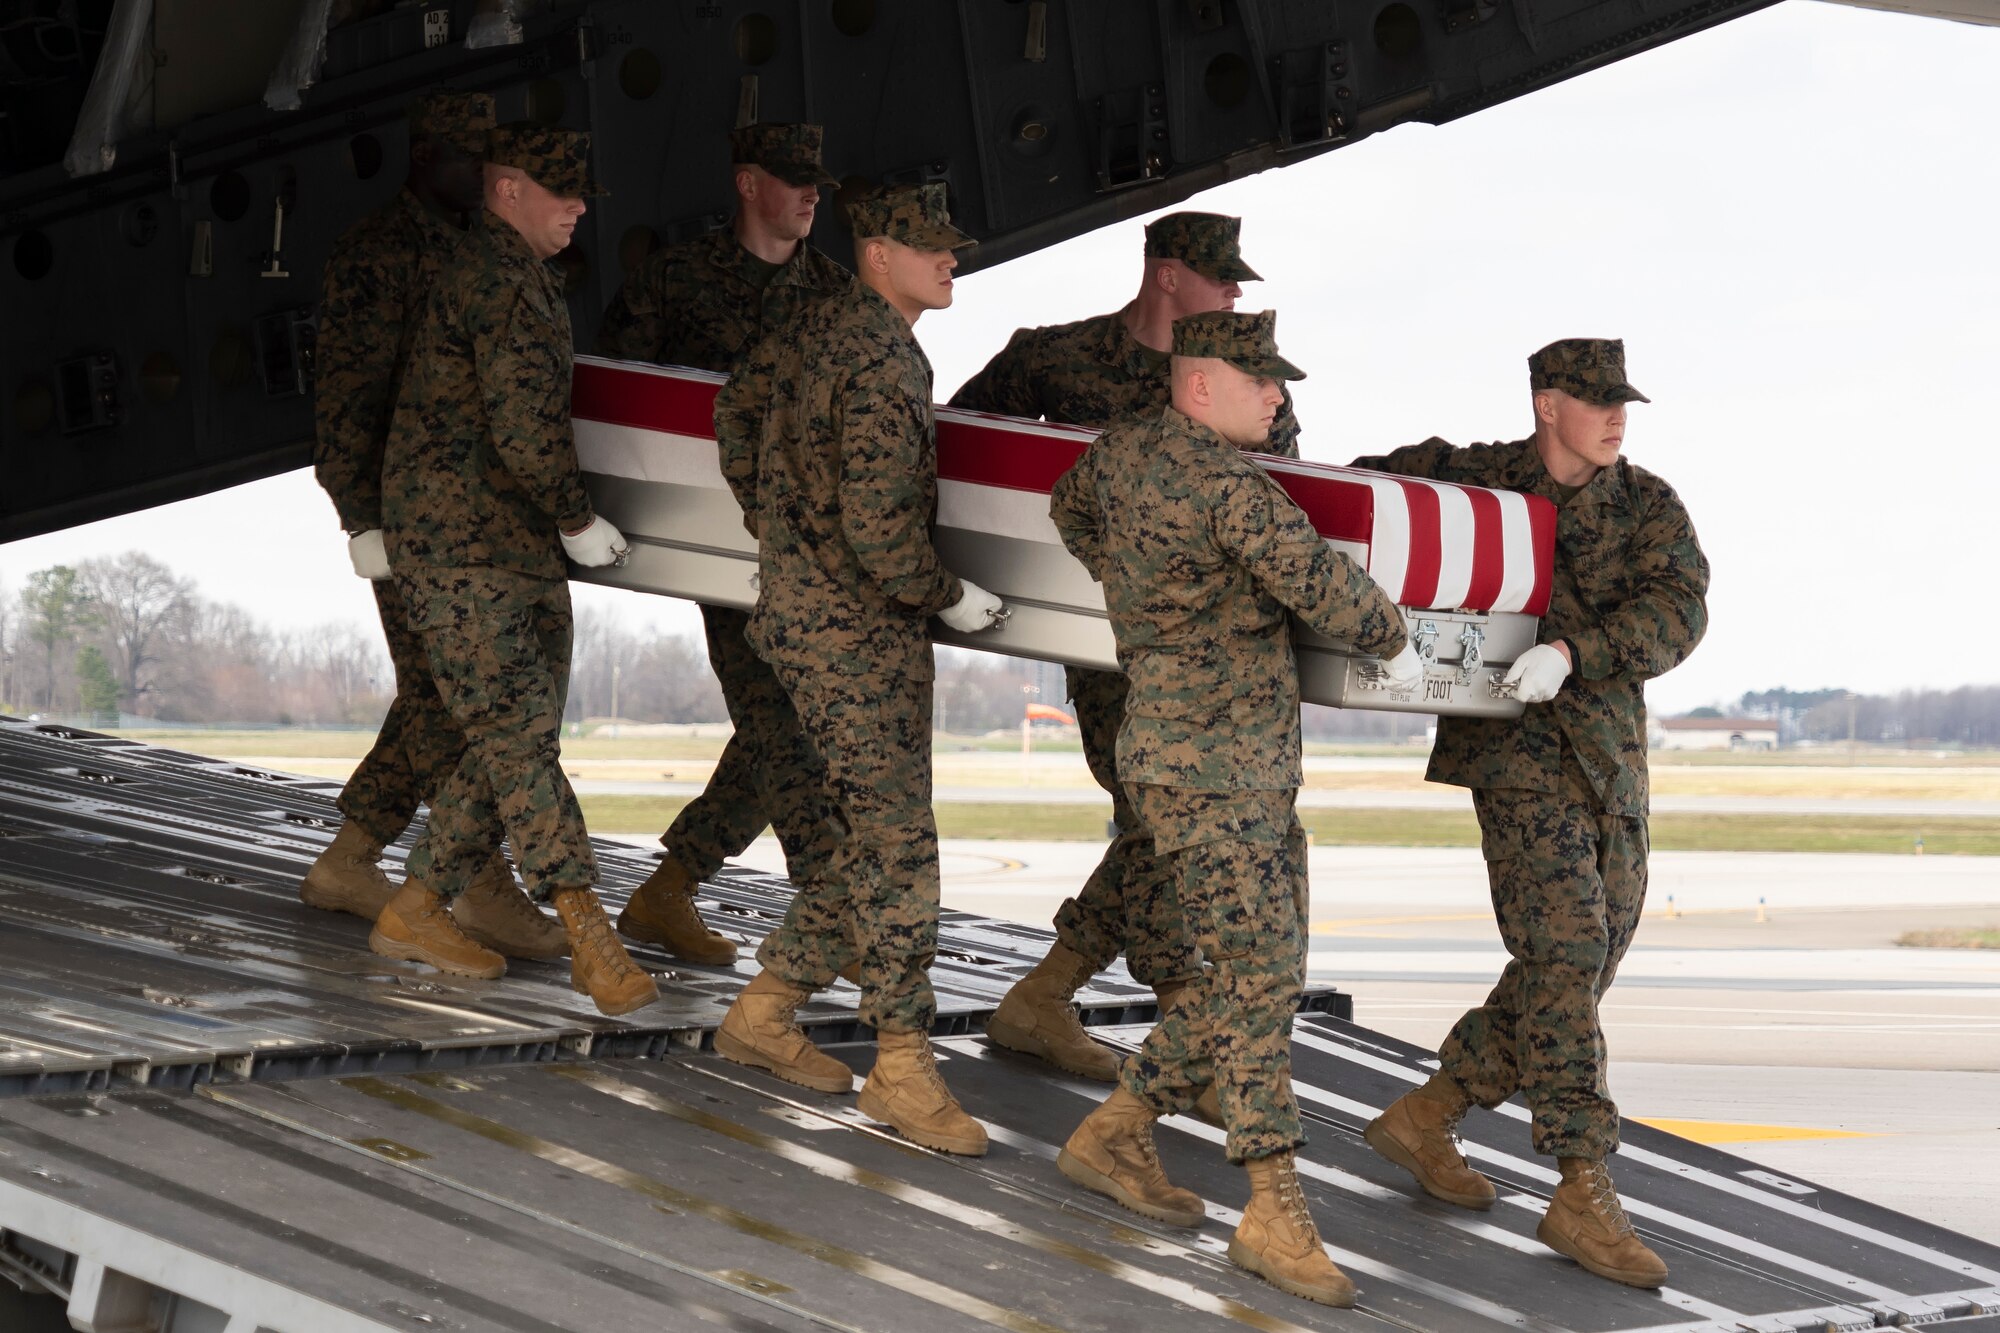 A U.S. Marine Corps carry team transfers the remains of Marine Corps Cpl. Jacob M. Moore of Catlettsburg, Kentucky, at Dover Air Force Base, Delaware, March 25, 2022. Moore was assigned to Marine Medium Tiltrotor Squadron 261, Marine Aircraft Group 26, 2nd Marine Aircraft Wing, Marine Corps Air Station New River, North Carolina. (U.S. Air Force photo by Jason Minto)